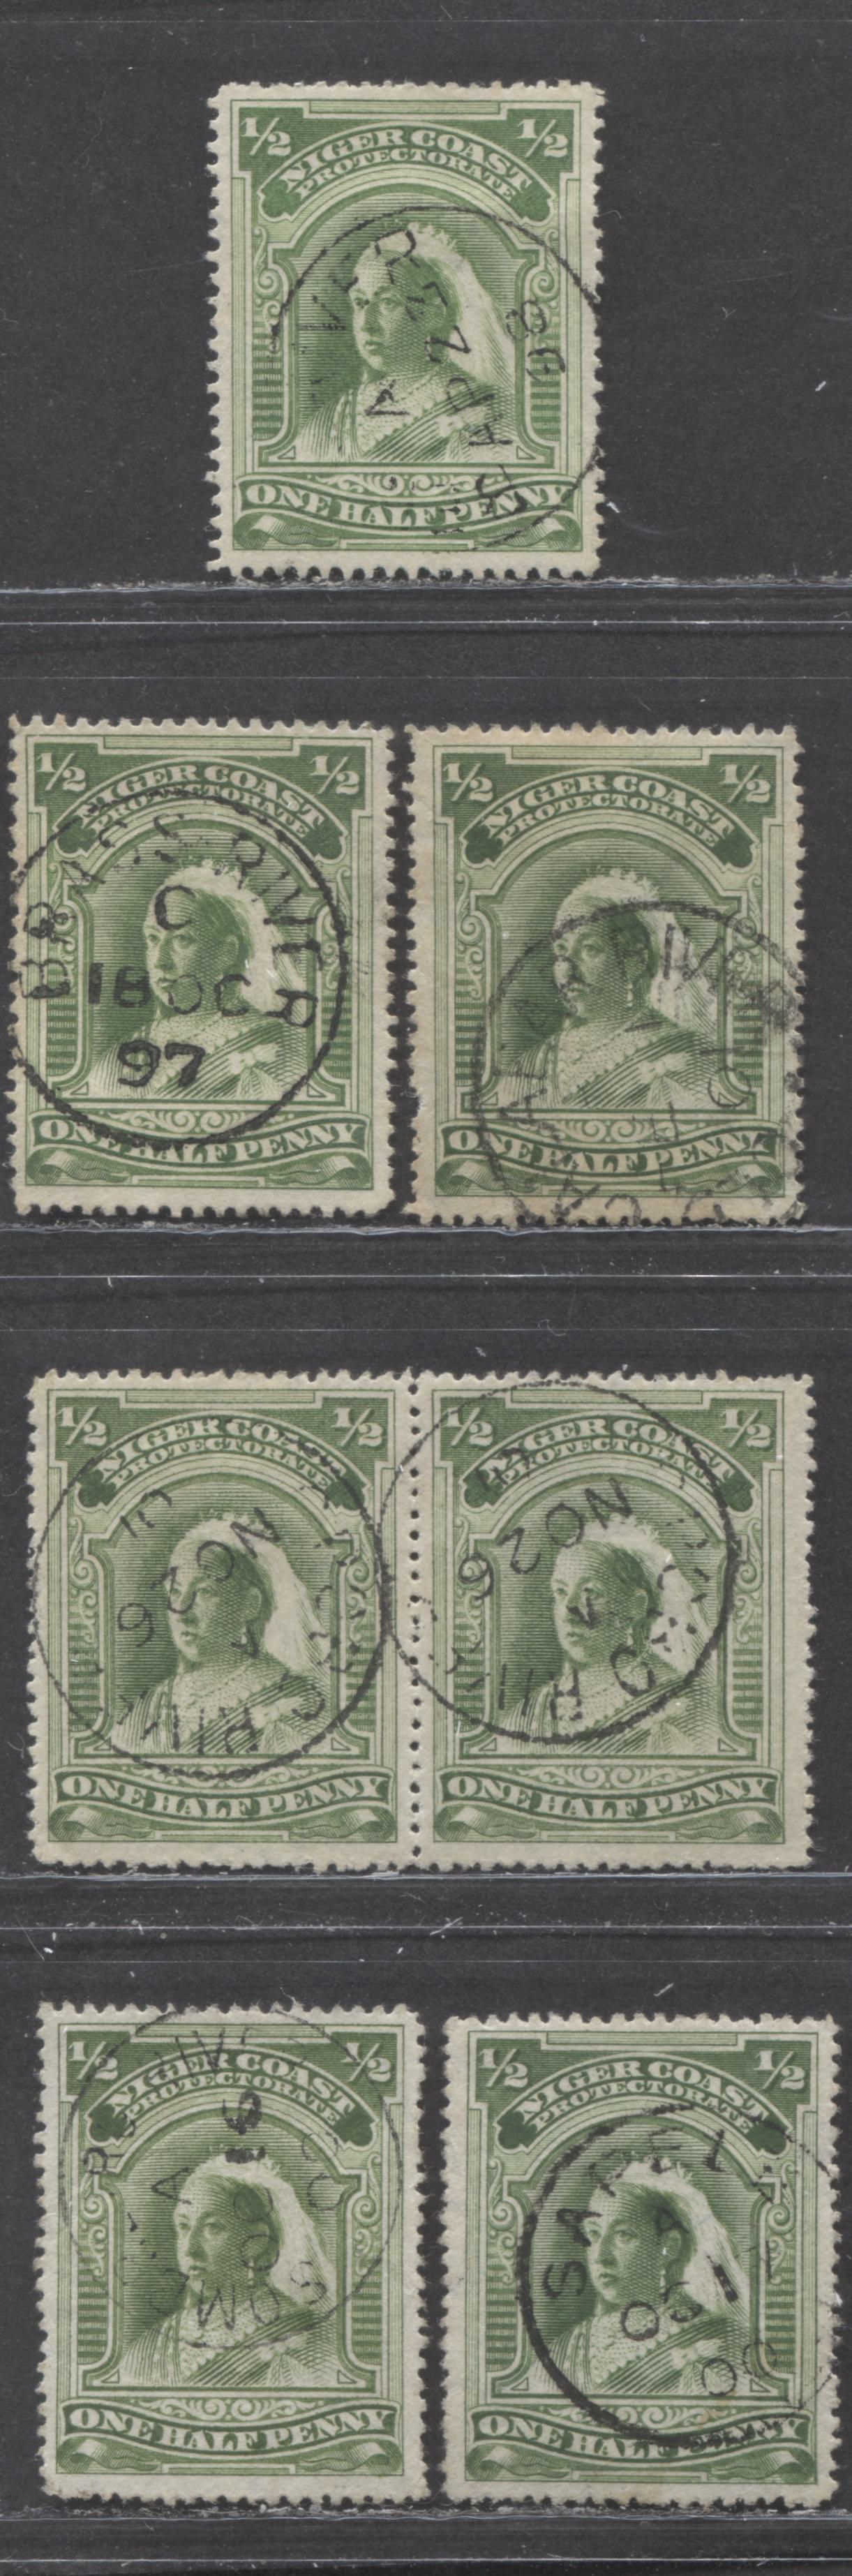 Lot 219 Niger Coast SC#55,55a(SG#66c) One Halfpenny Green 1897 - 1898 Watermarked Issue, Perf 15.5 - 16., A Fine - Very Fine Used Example, Click on Listing to See ALL Pictures, Estimated Value $45 USD